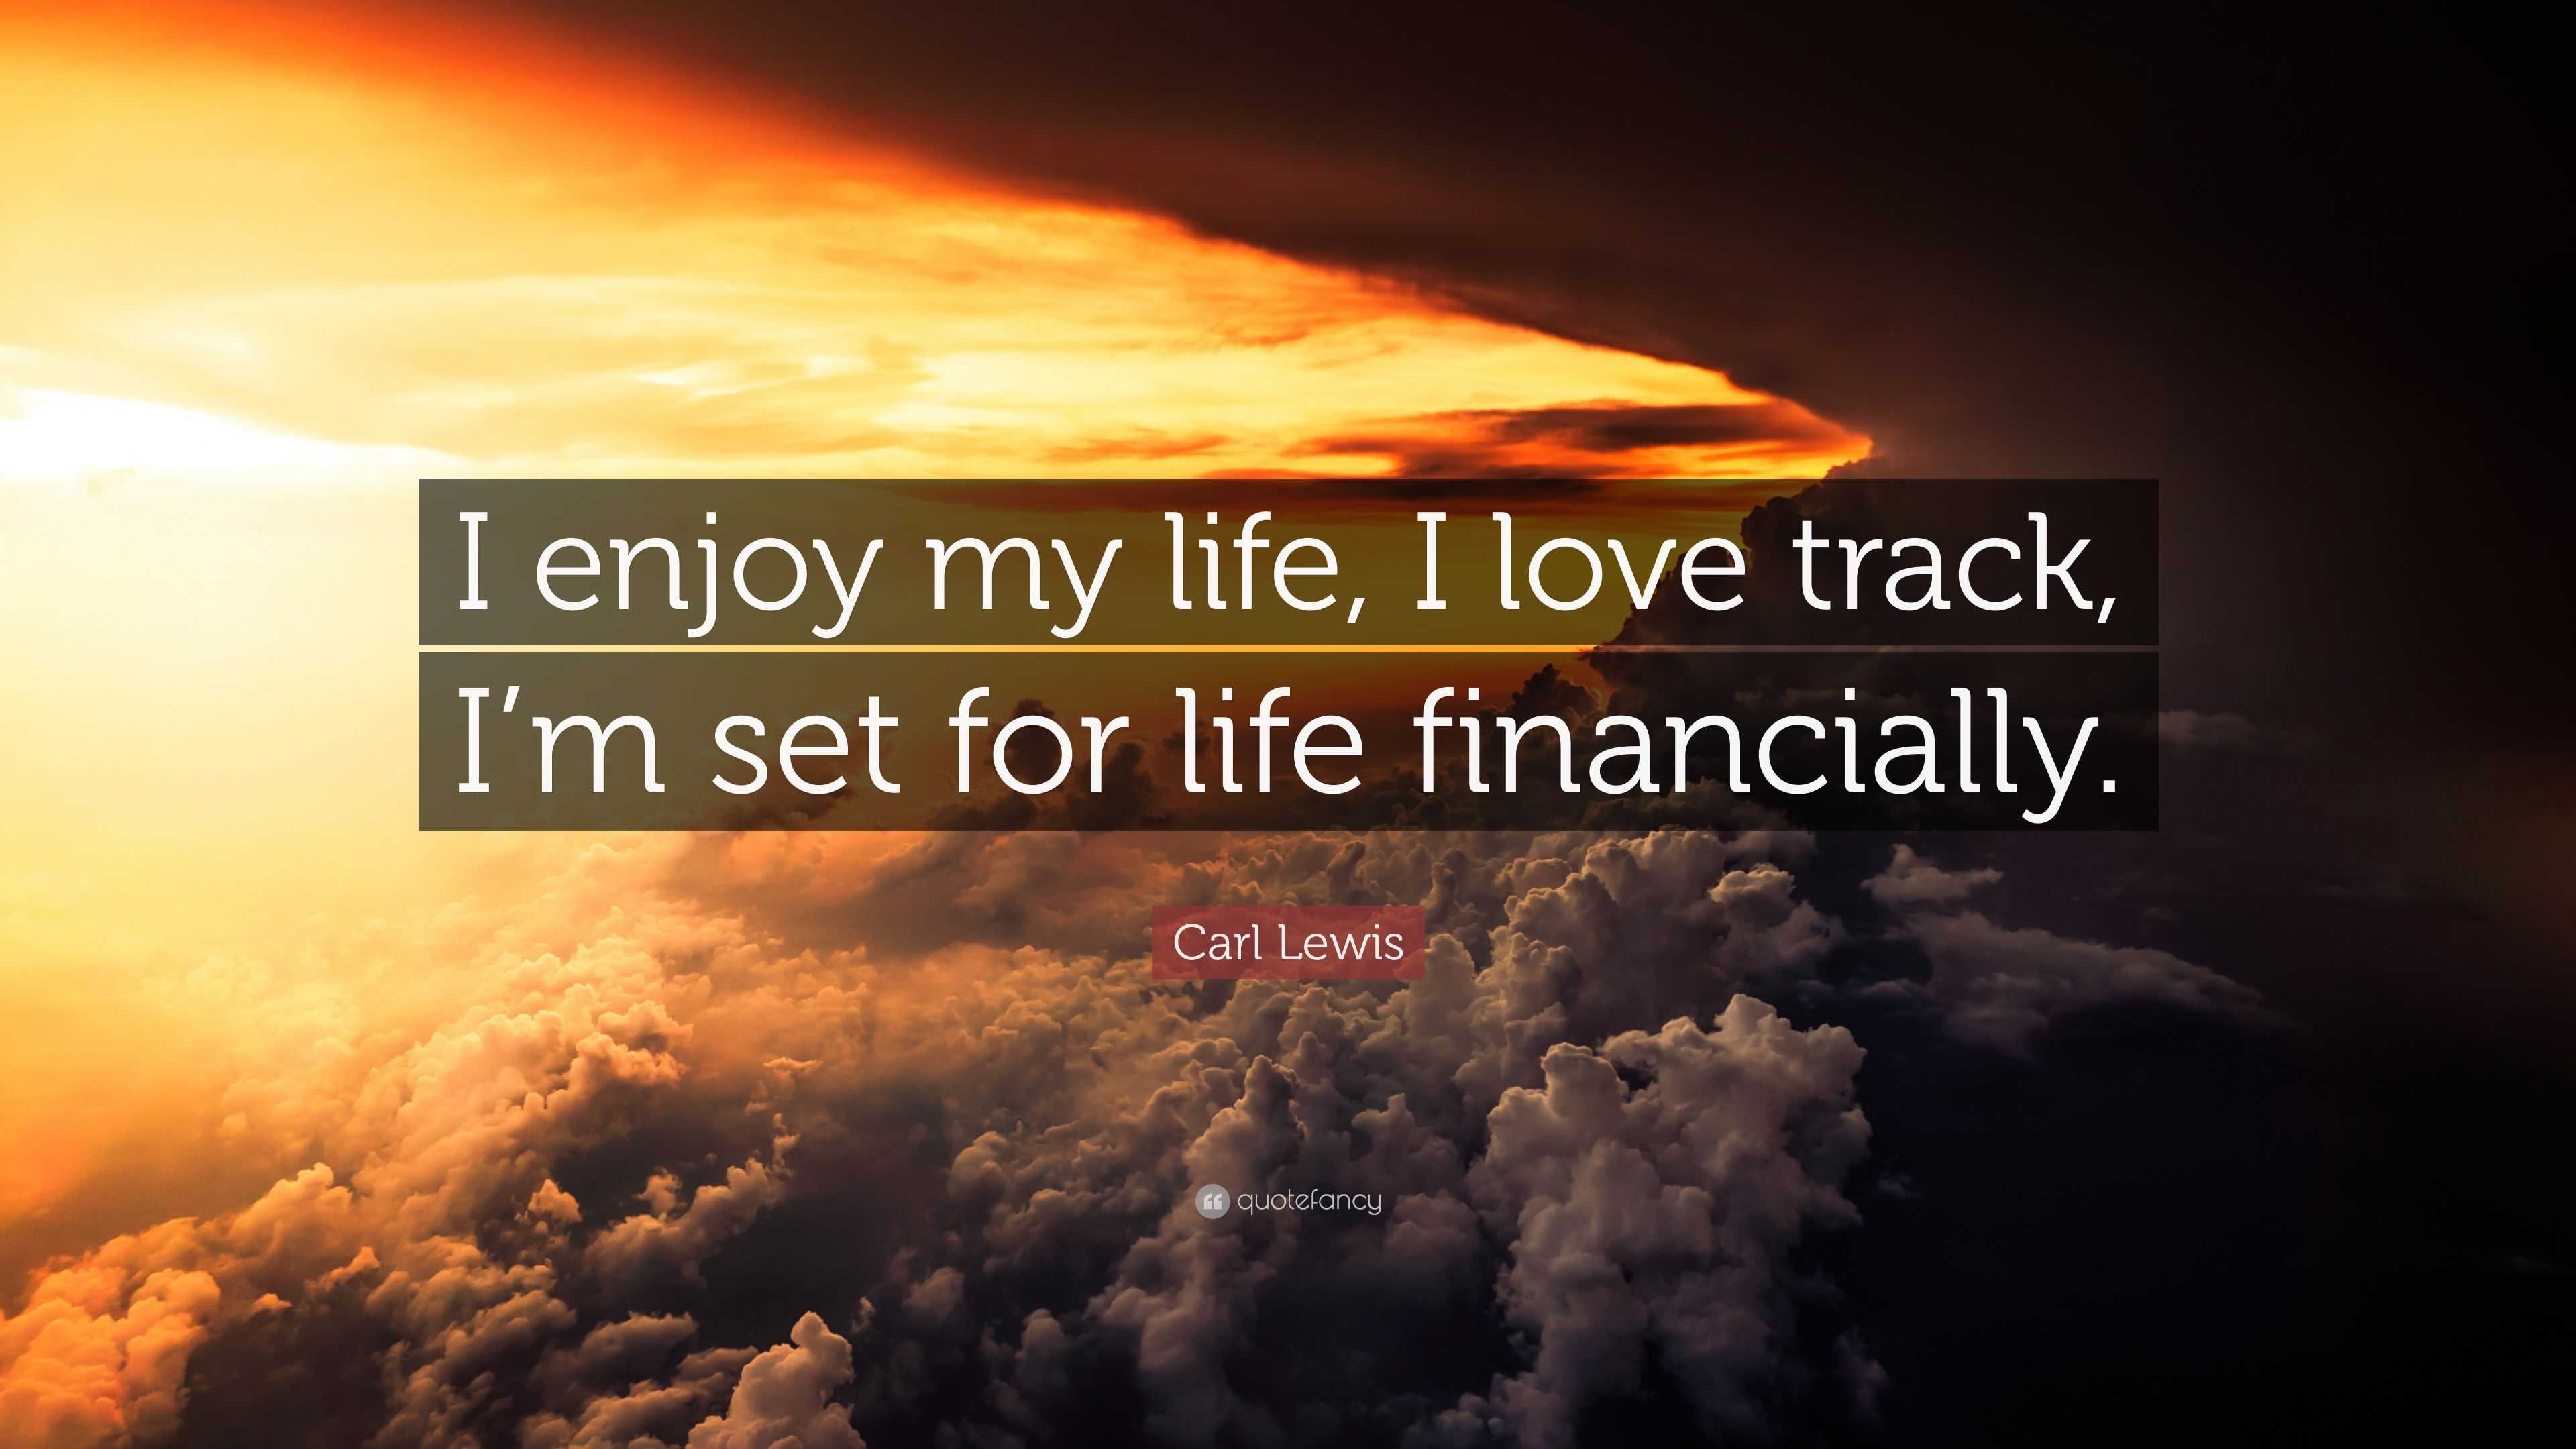 Carl Lewis Quote: “I enjoy my life, I love track, I'm set for life  financially.”